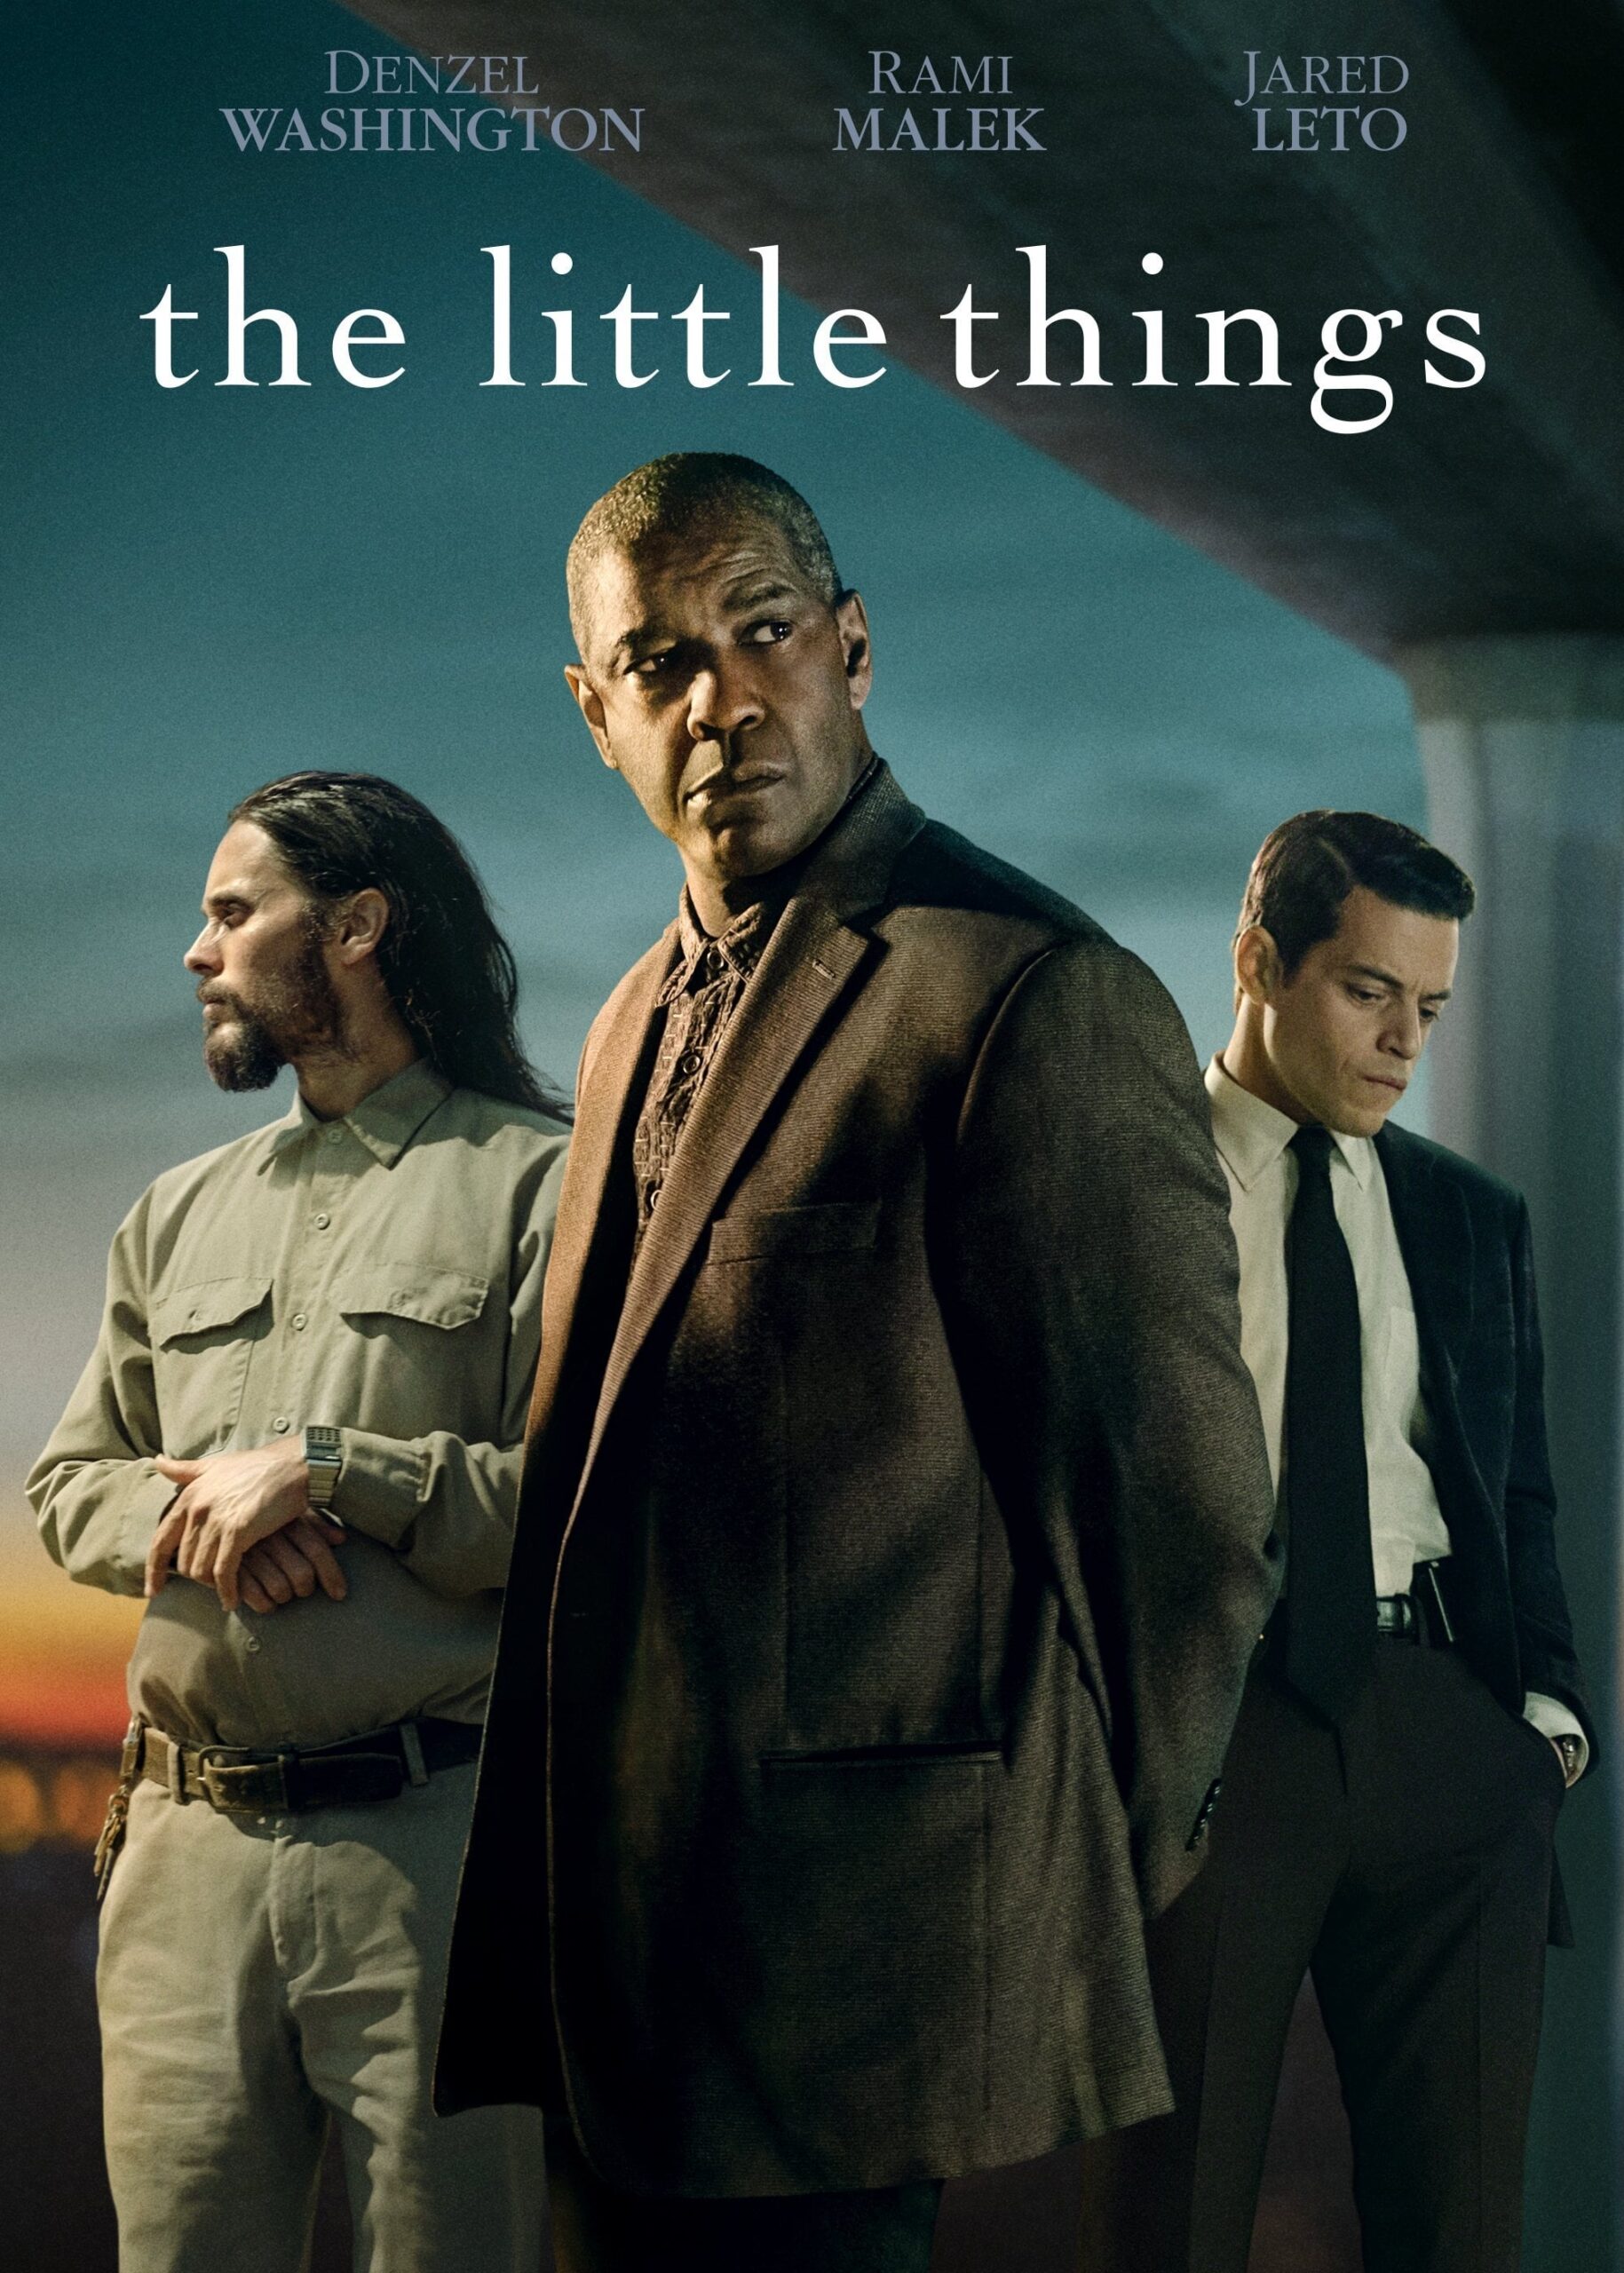 Poster for the movie "The Little Things"